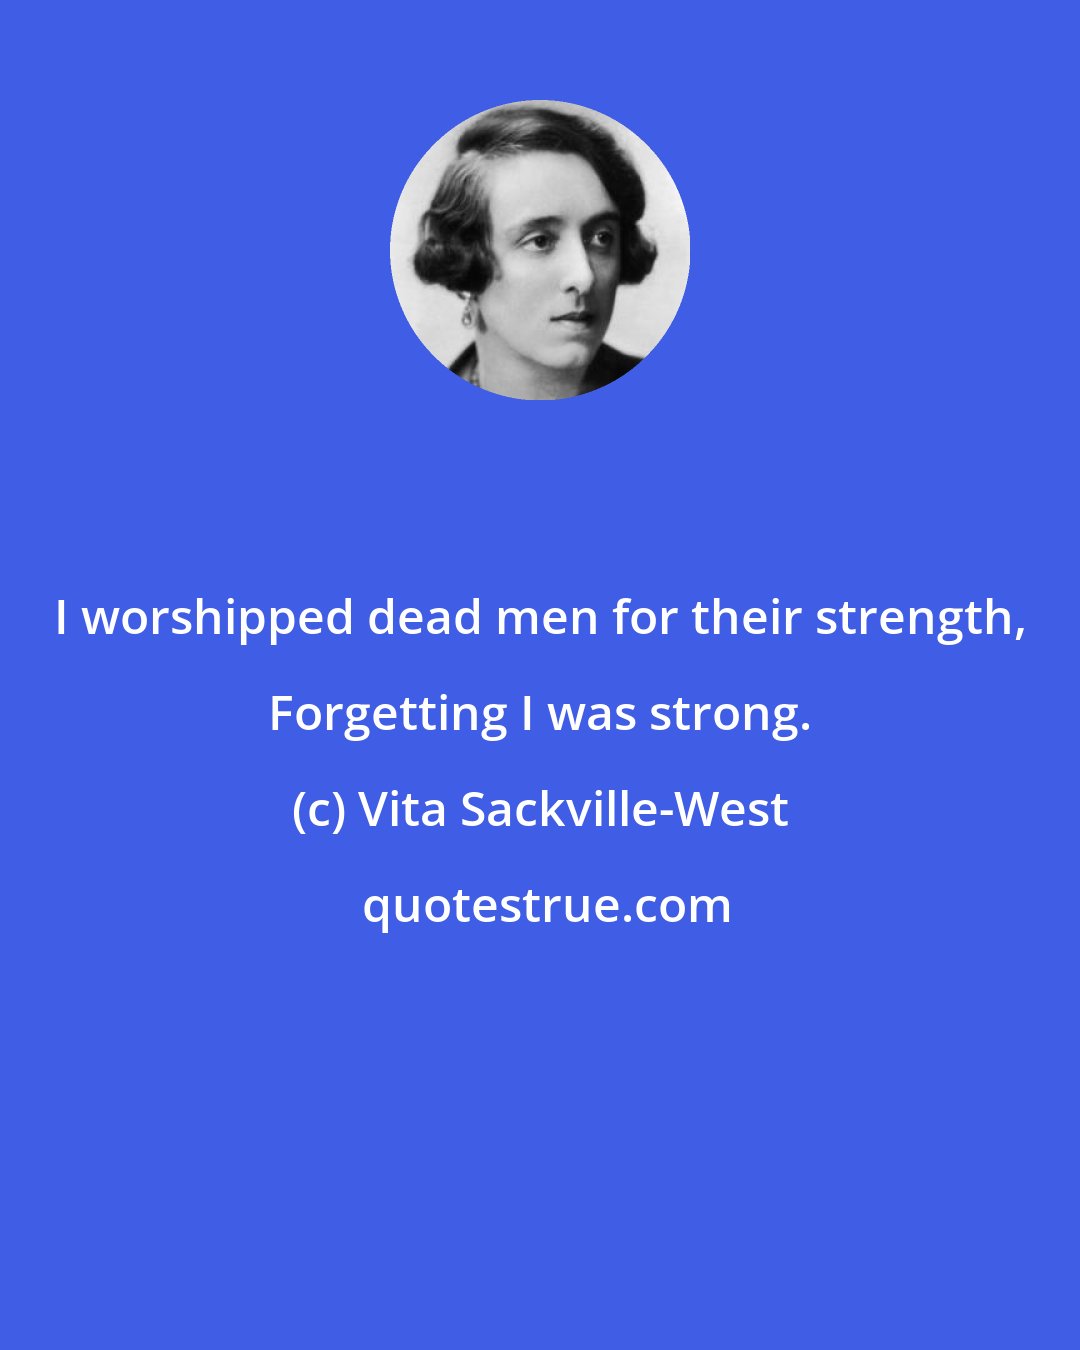 Vita Sackville-West: I worshipped dead men for their strength, Forgetting I was strong.